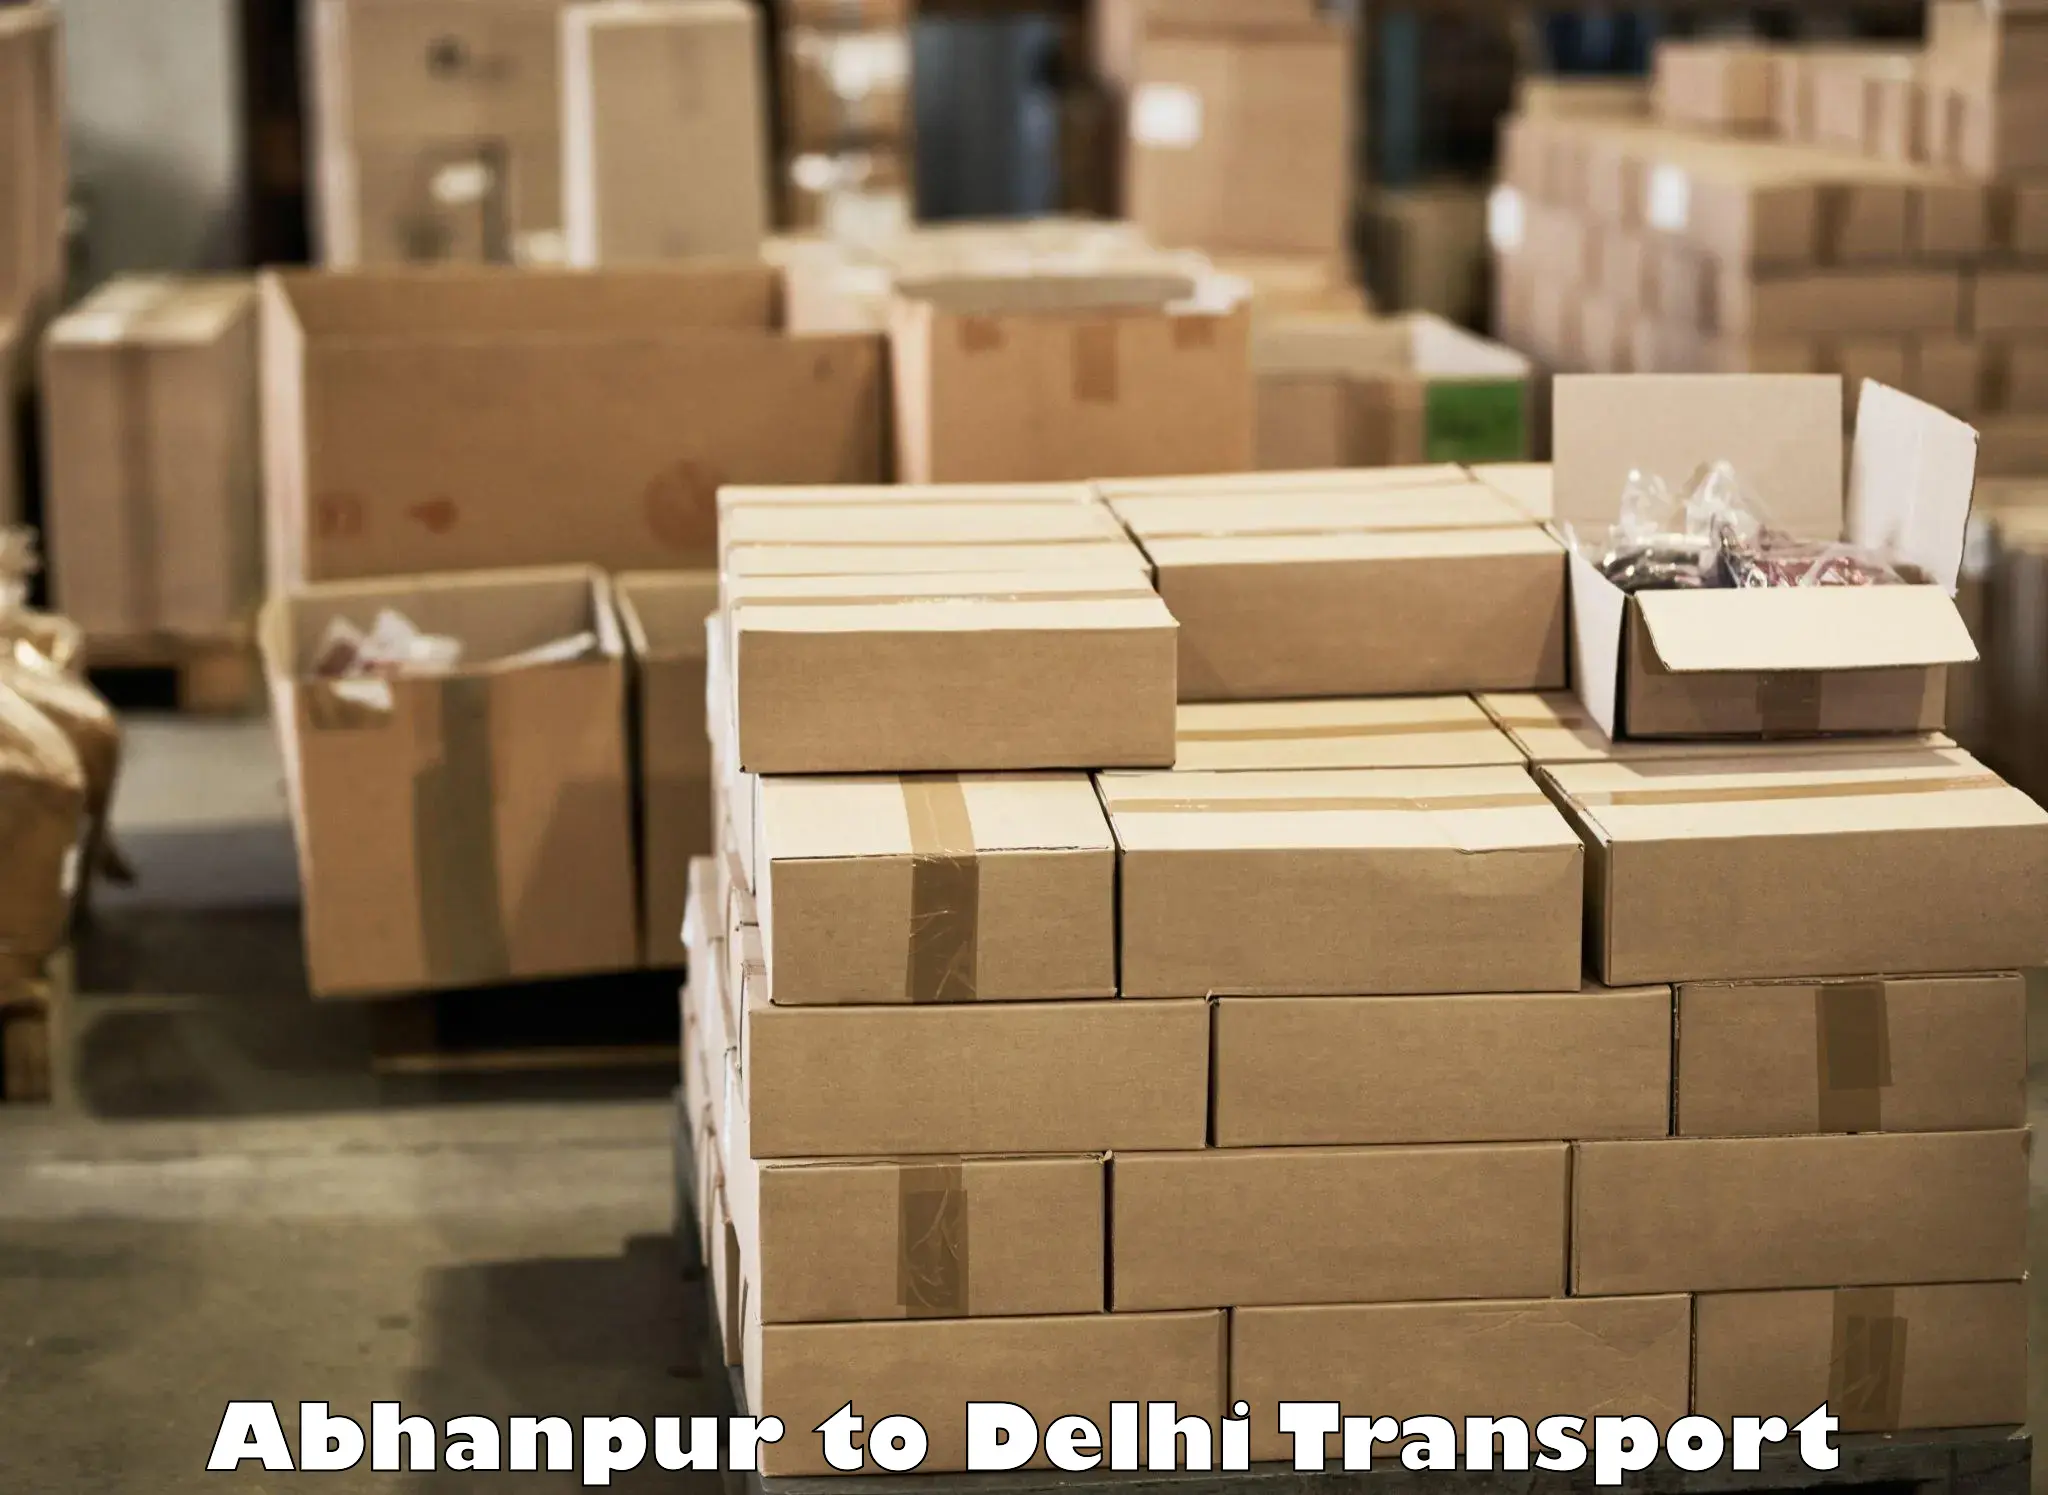 Commercial transport service Abhanpur to Delhi